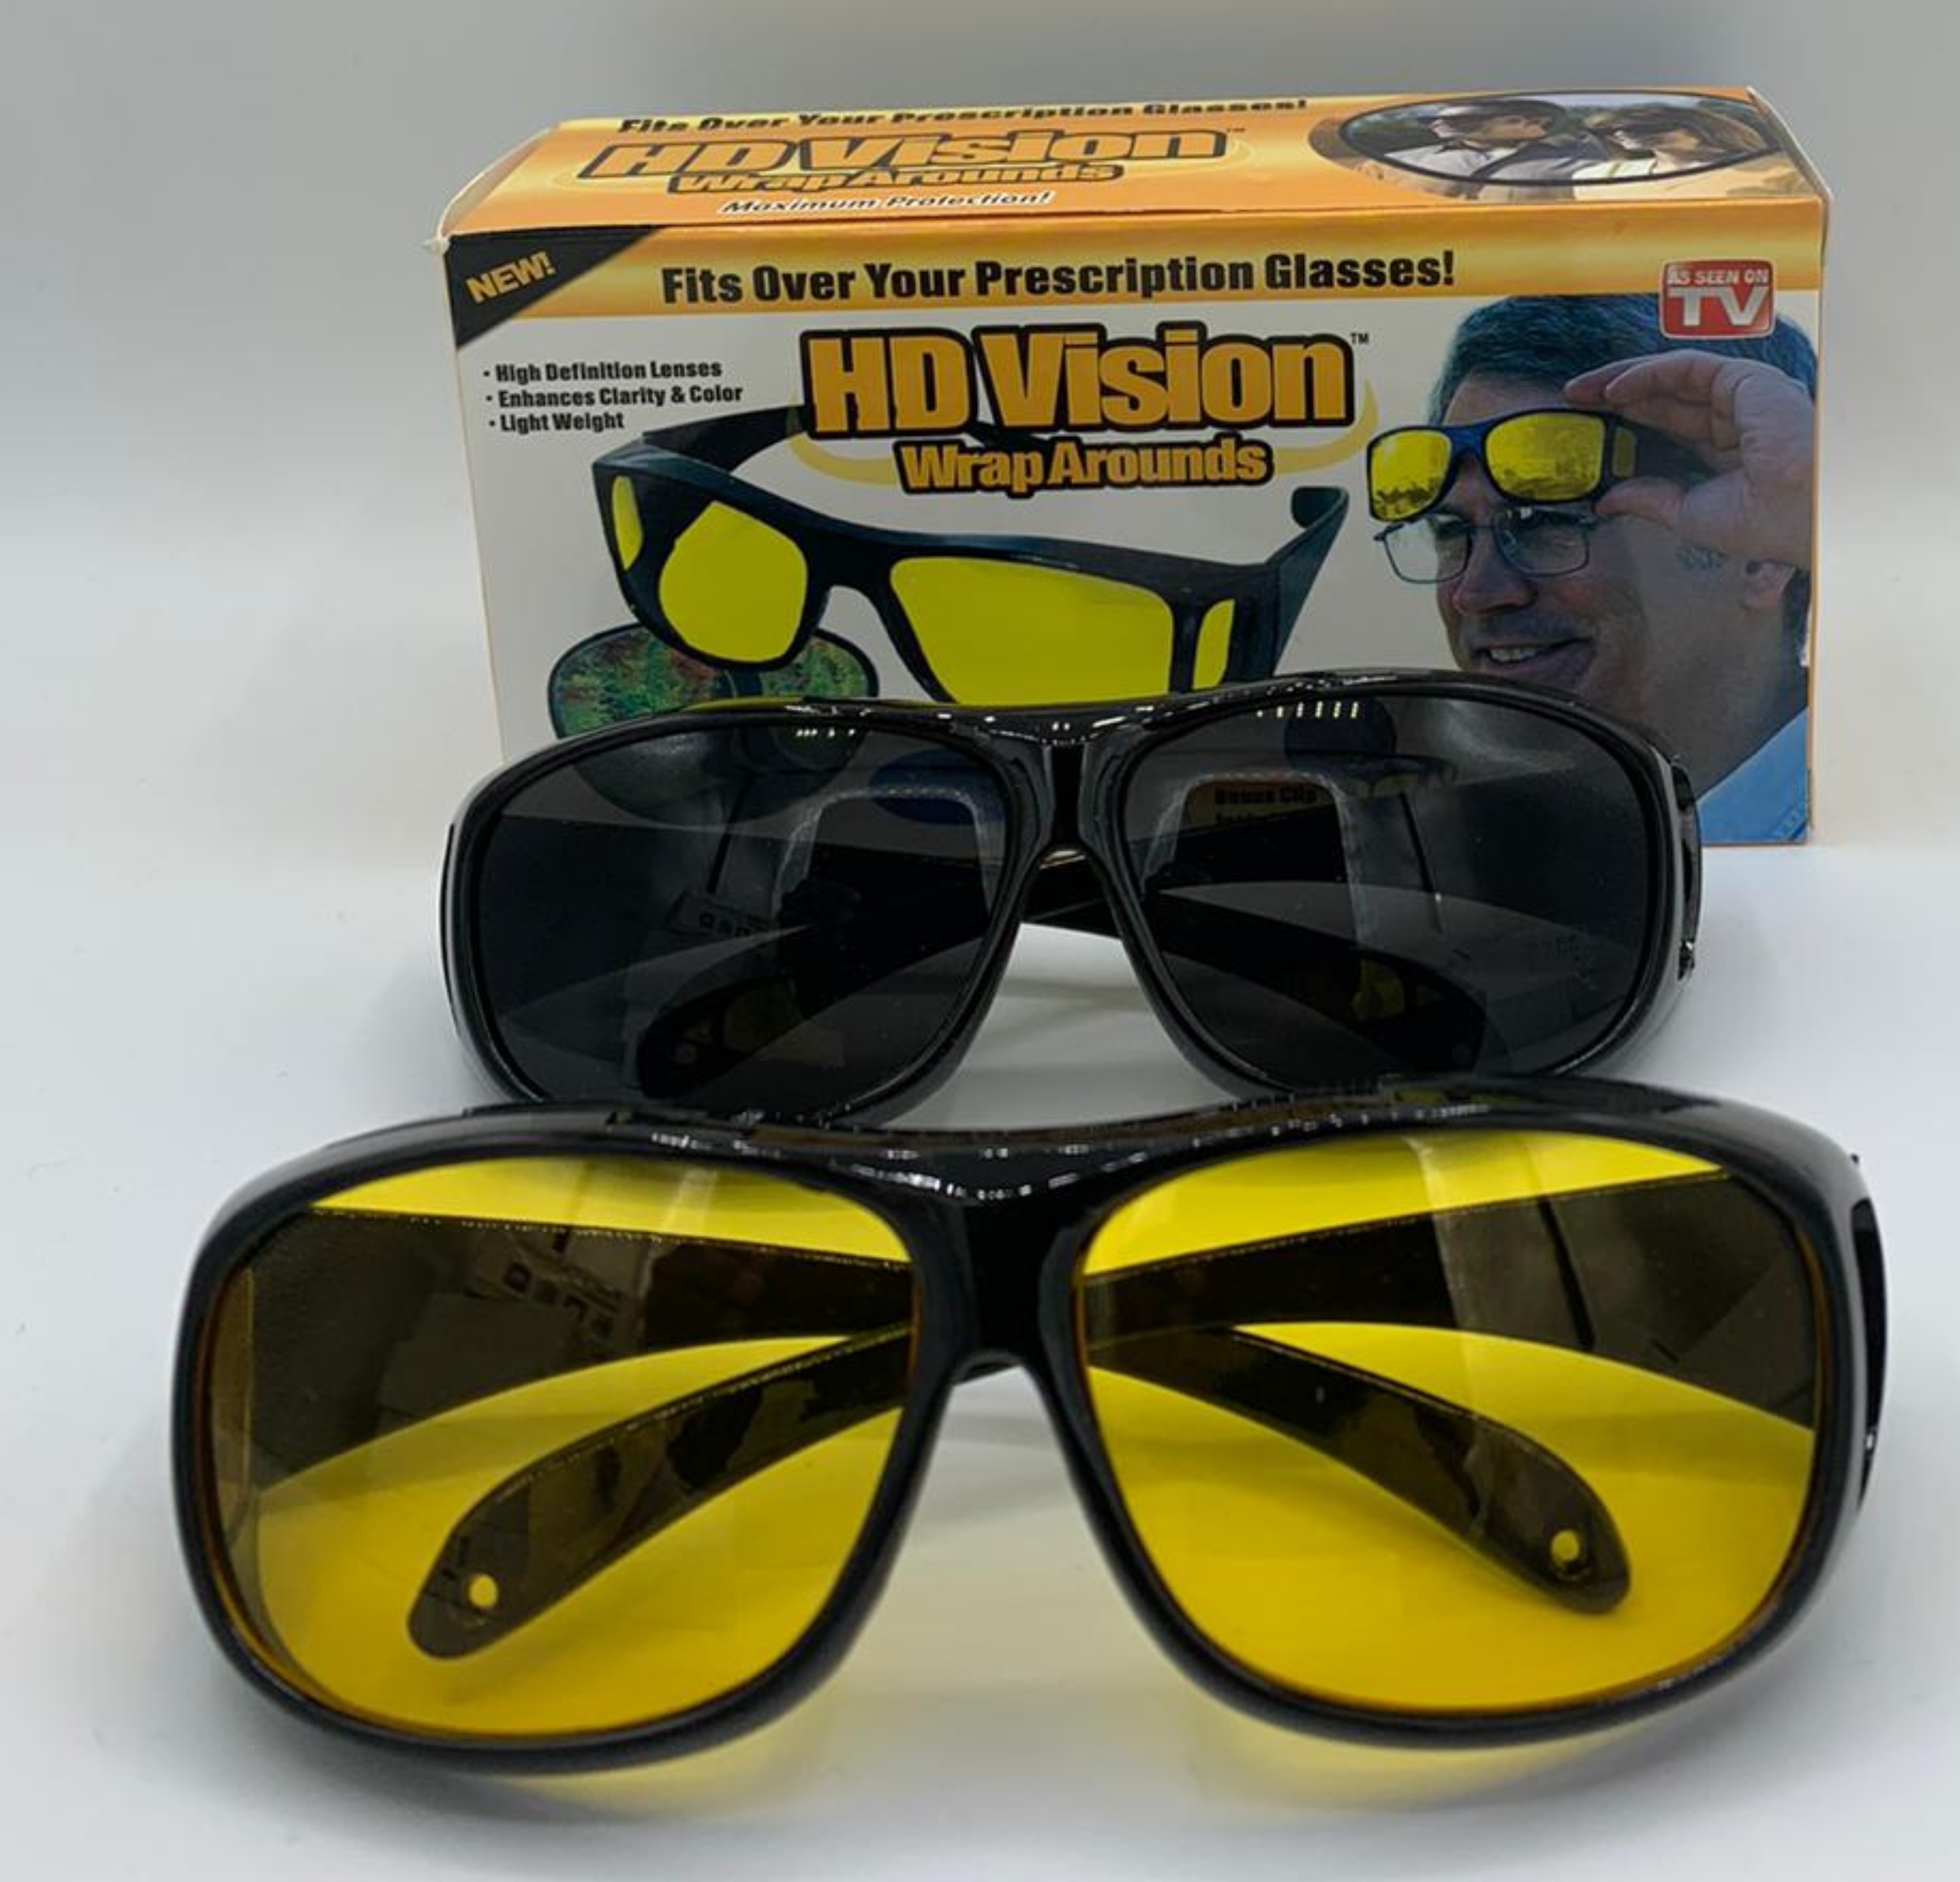 HD Night & Day Vision Wraparound Sunglasses, As Seen on TV, Fits over Glasses Bonus Pair Included - image 6 of 6